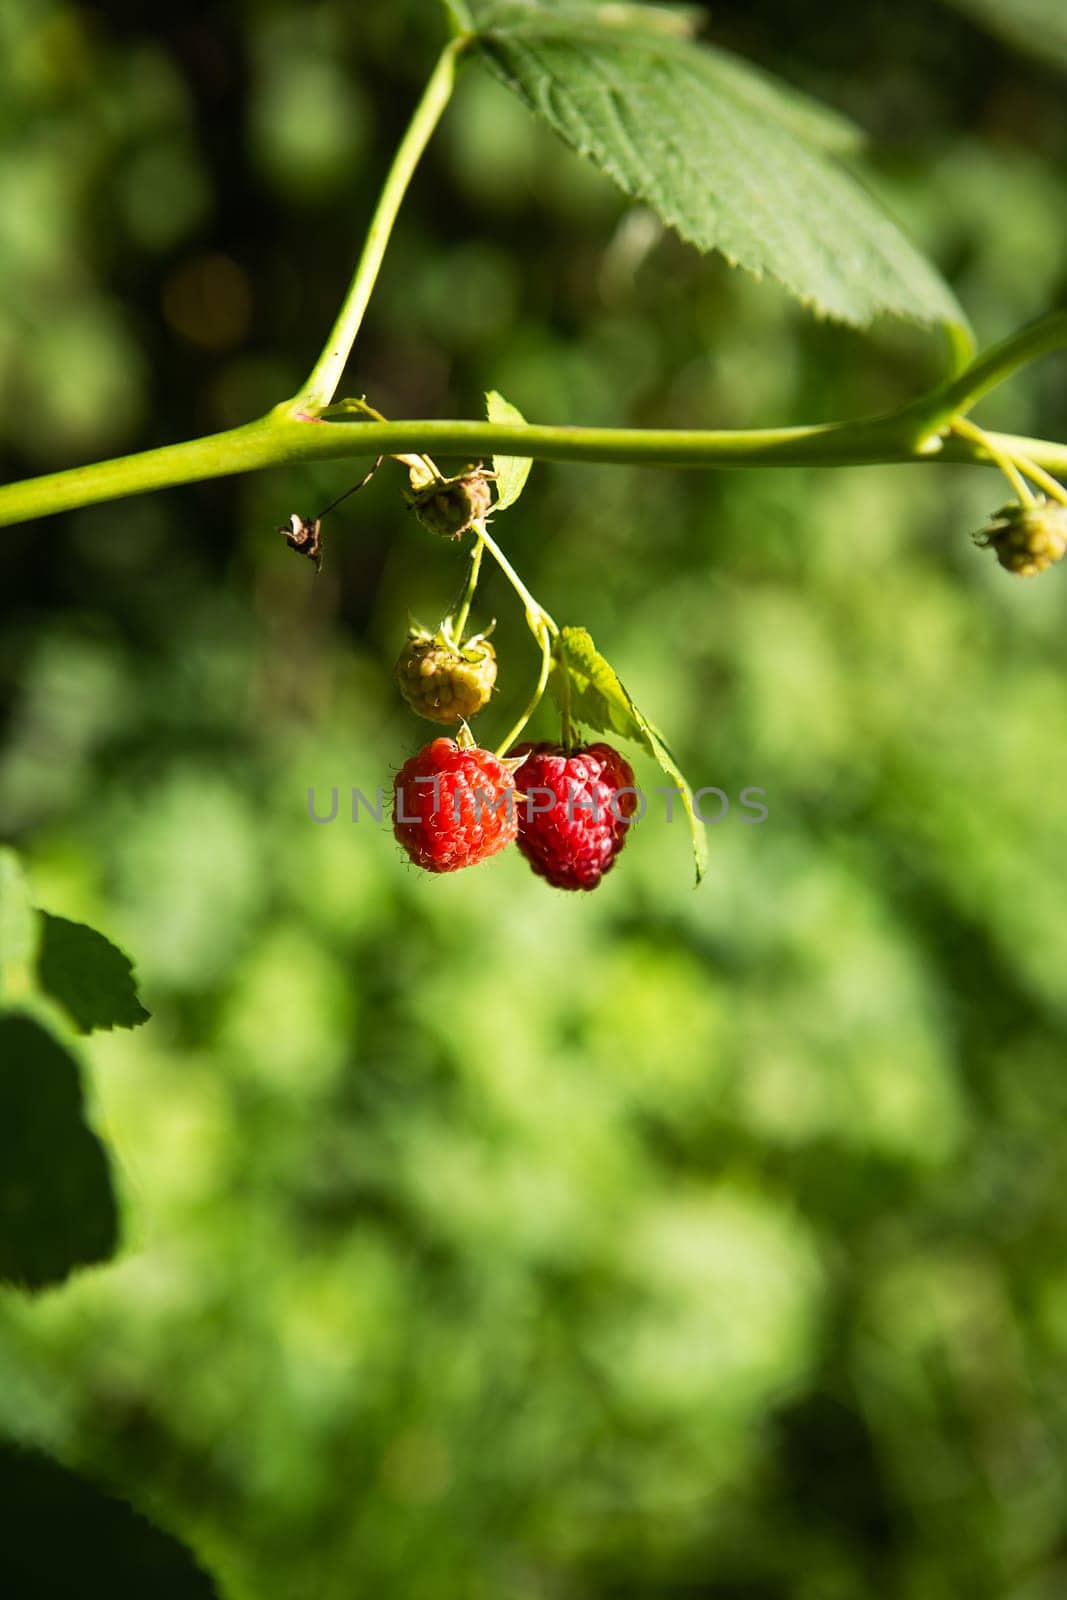 A very ripe and unripe raspberry hanging from a branch, shot in close-up. Sunny summer day, close-up. by sfinks